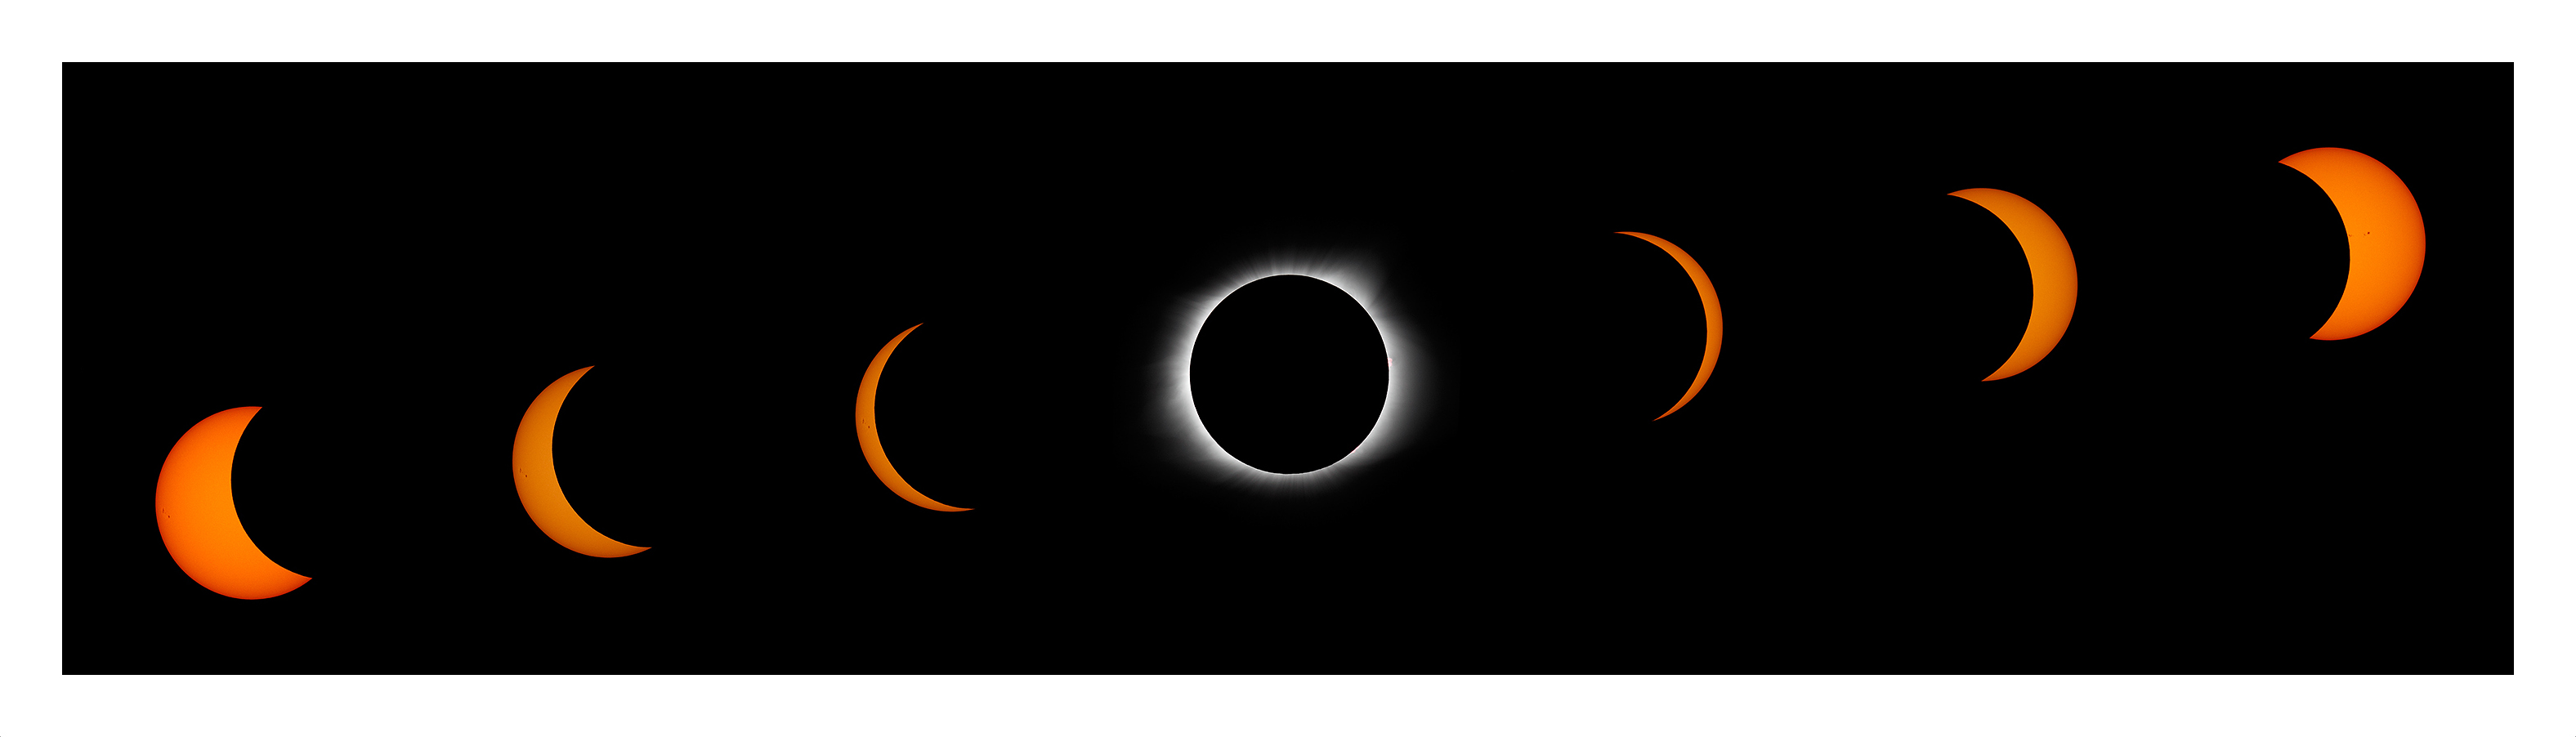 Composite of the Eclipse